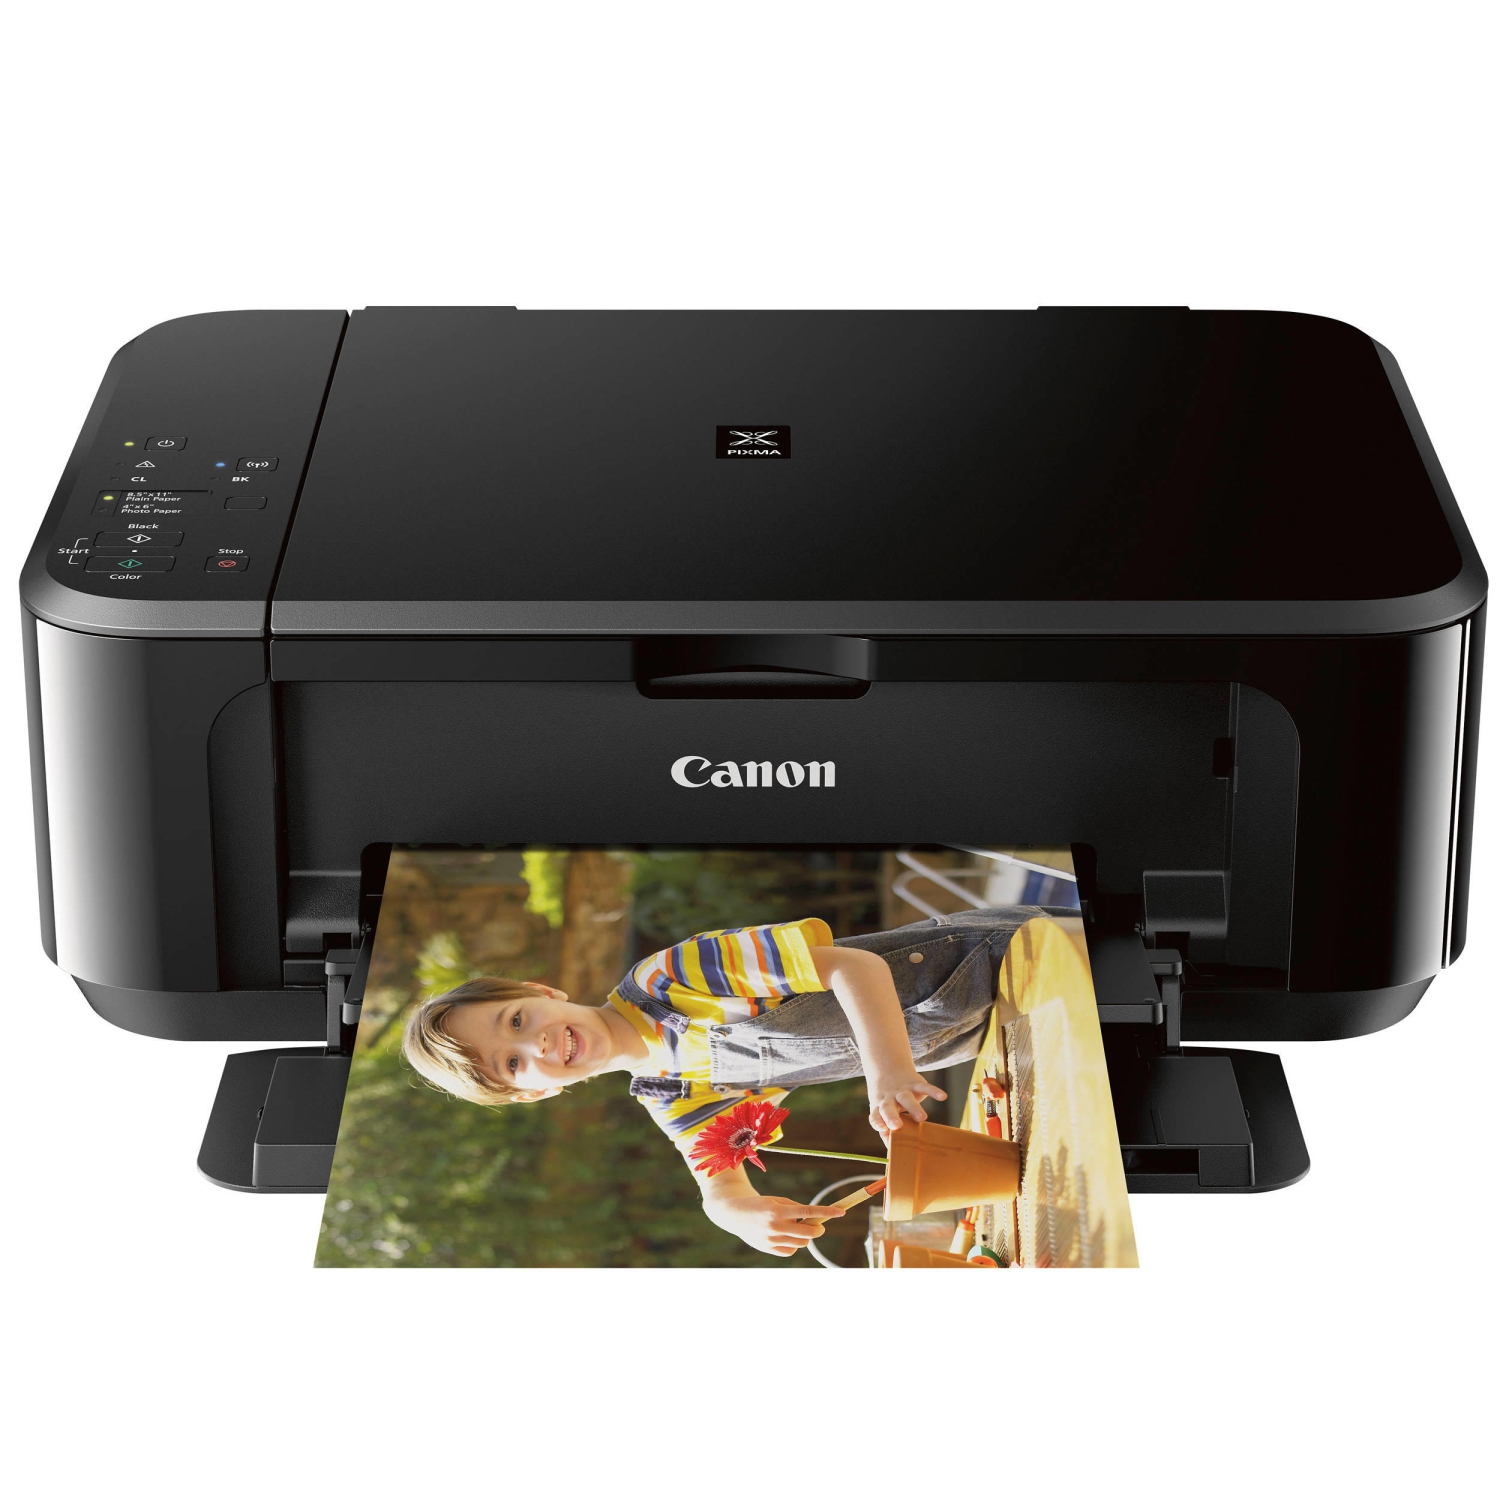 For Canon PIXMA MG3620 Black and White and Colour Scanning All-In-One Color Inkjet Printer With Printing Copying and Scanning